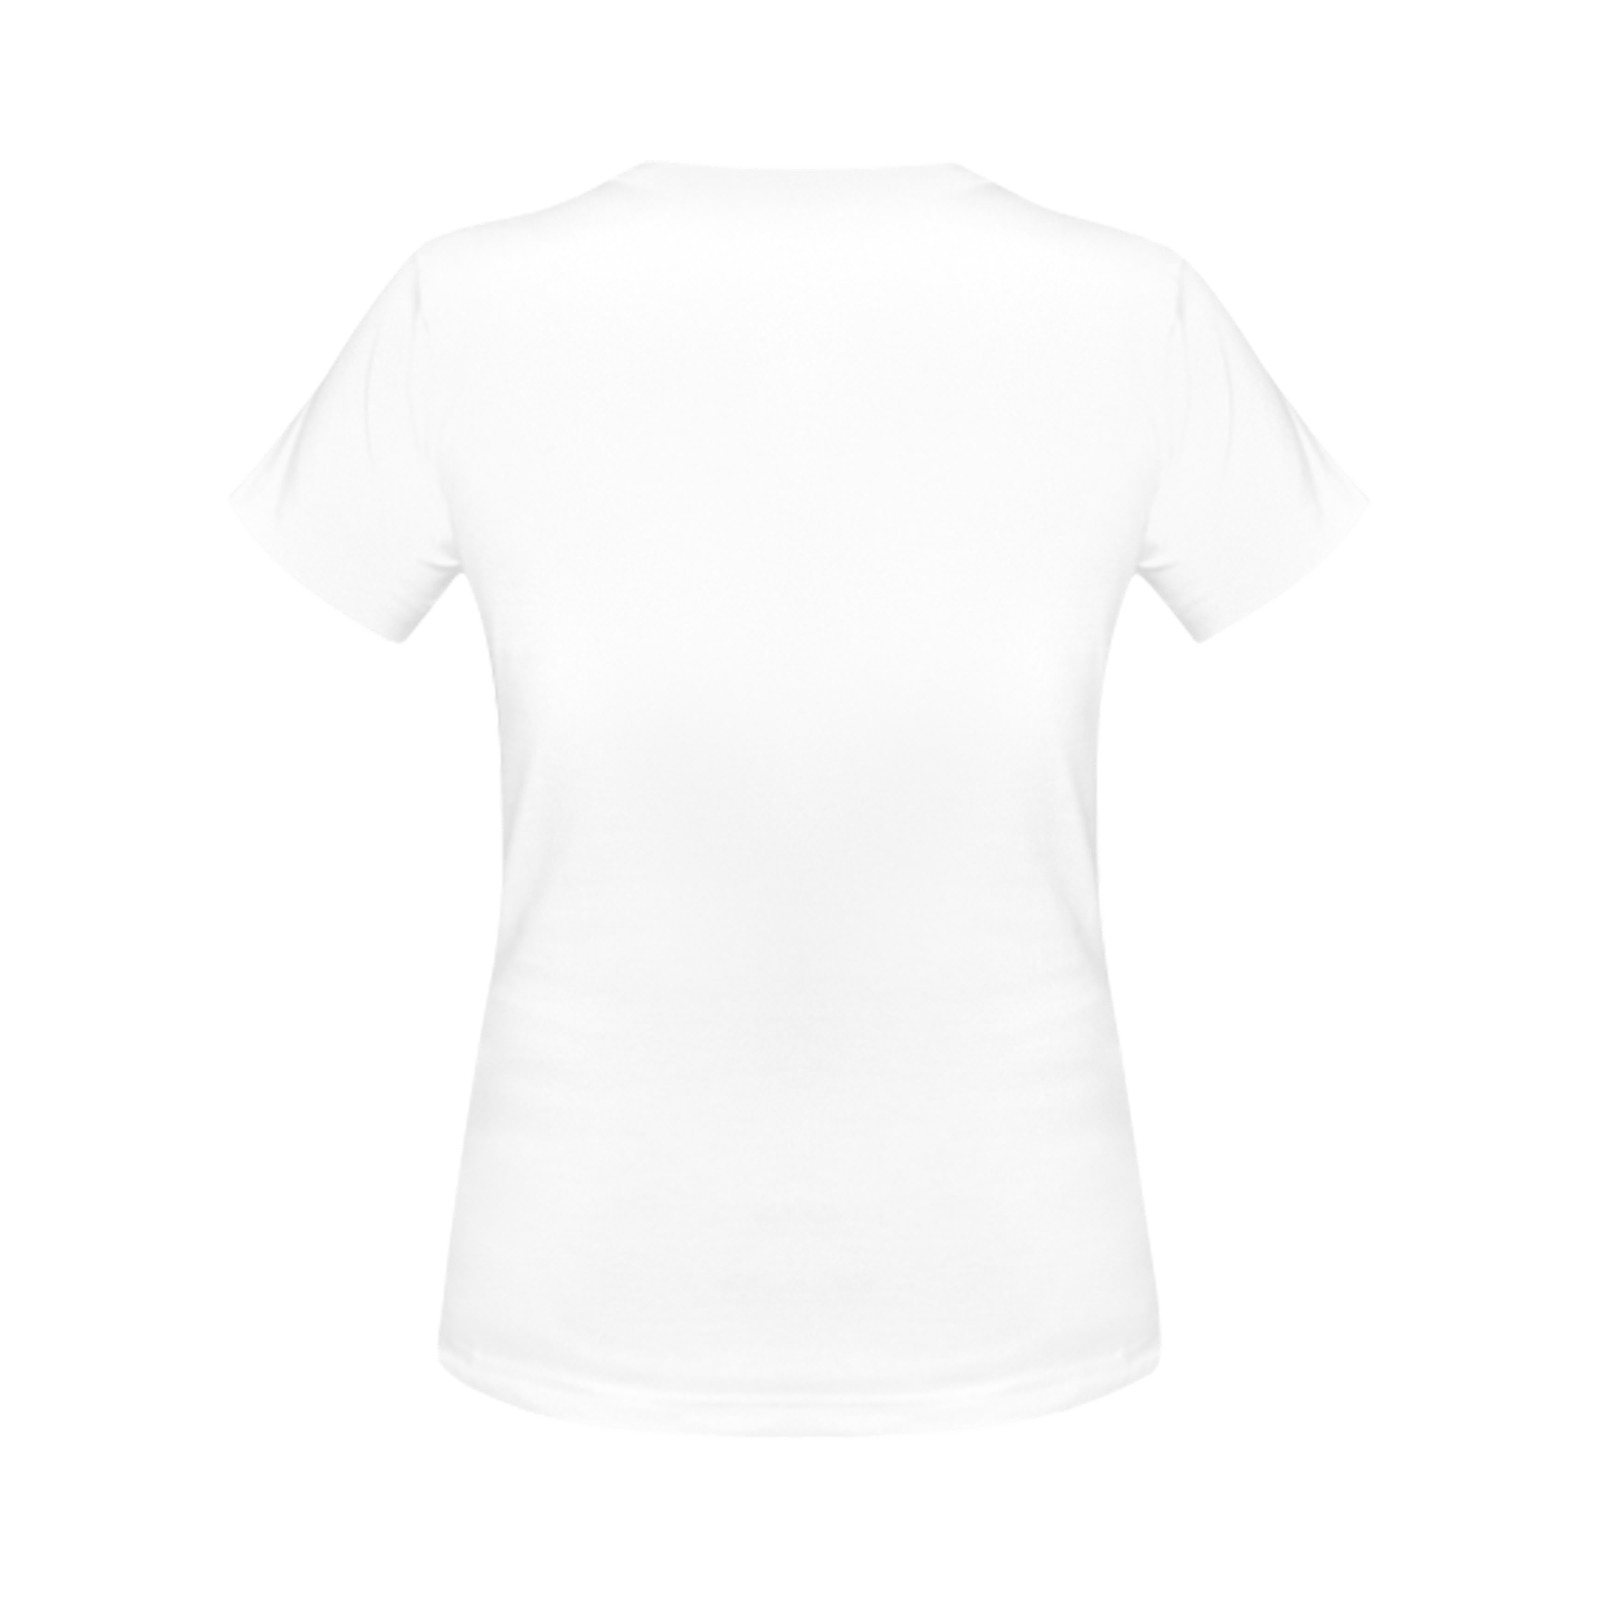 White Women's T-Shirt in USA Size (Front Printing Only)